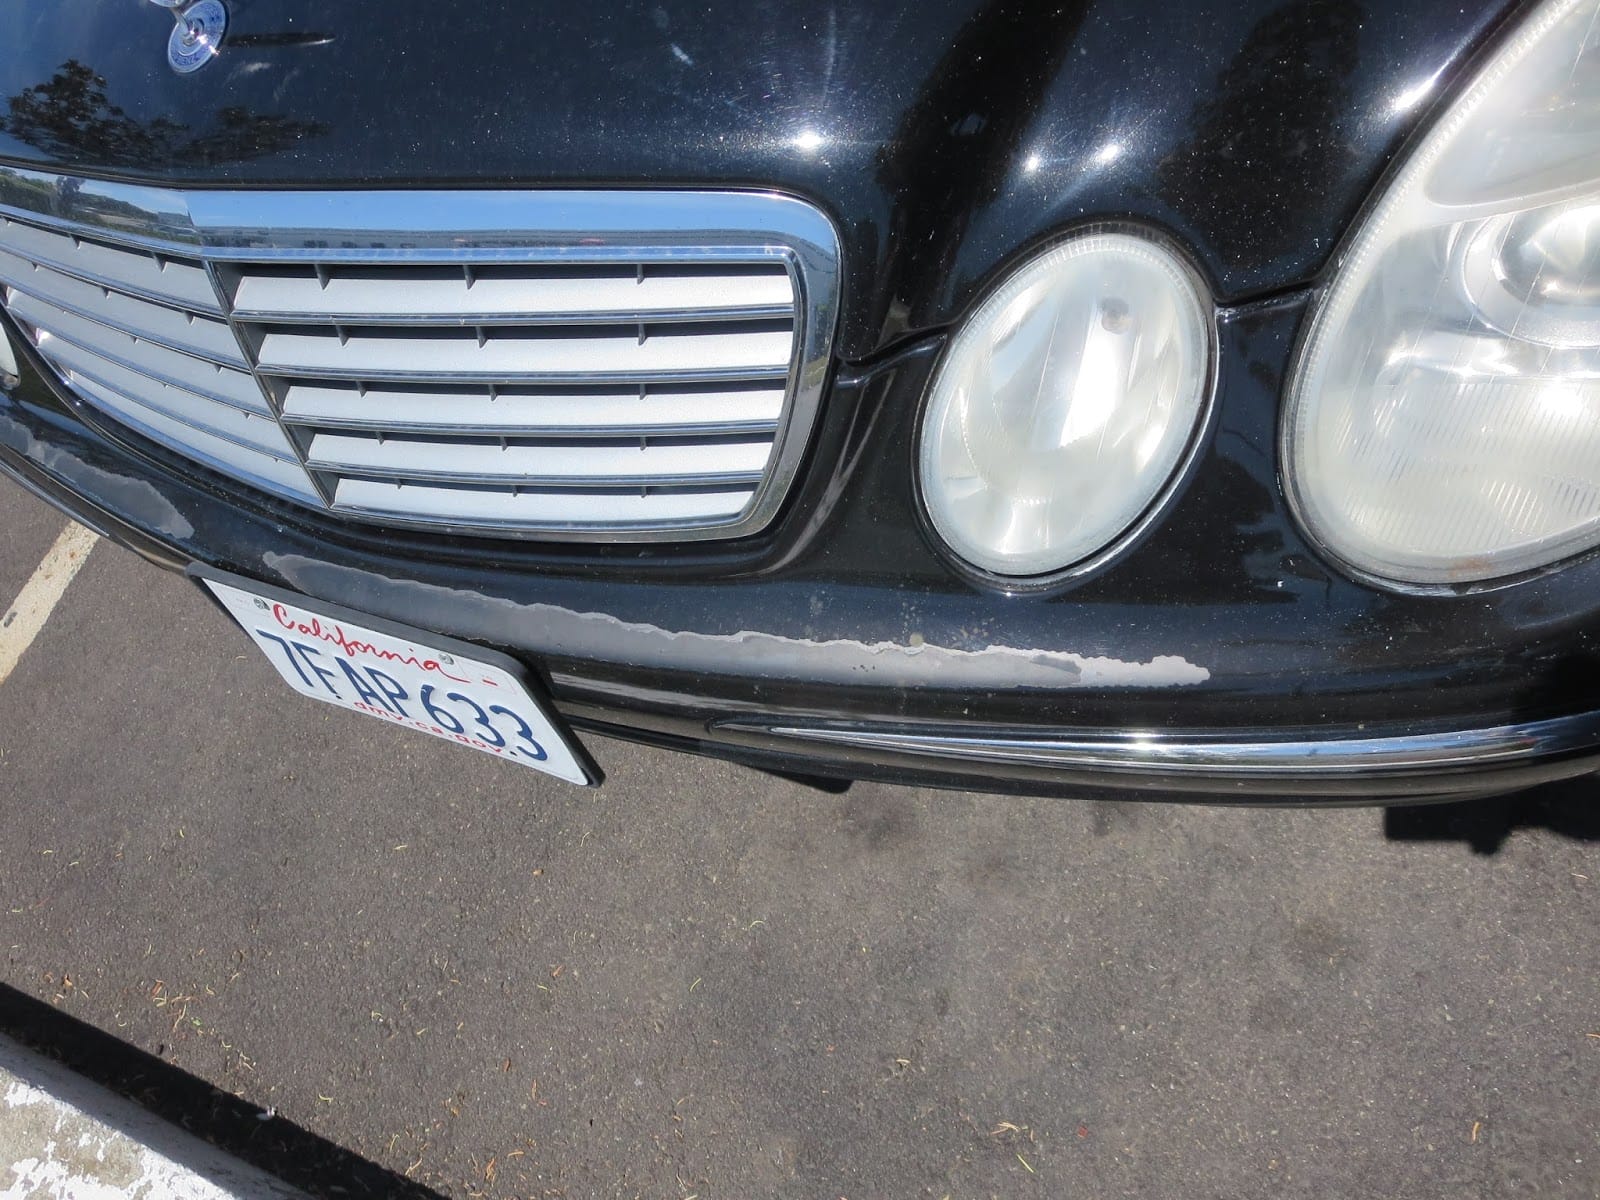 A Mercedes Benz car with front left headlight